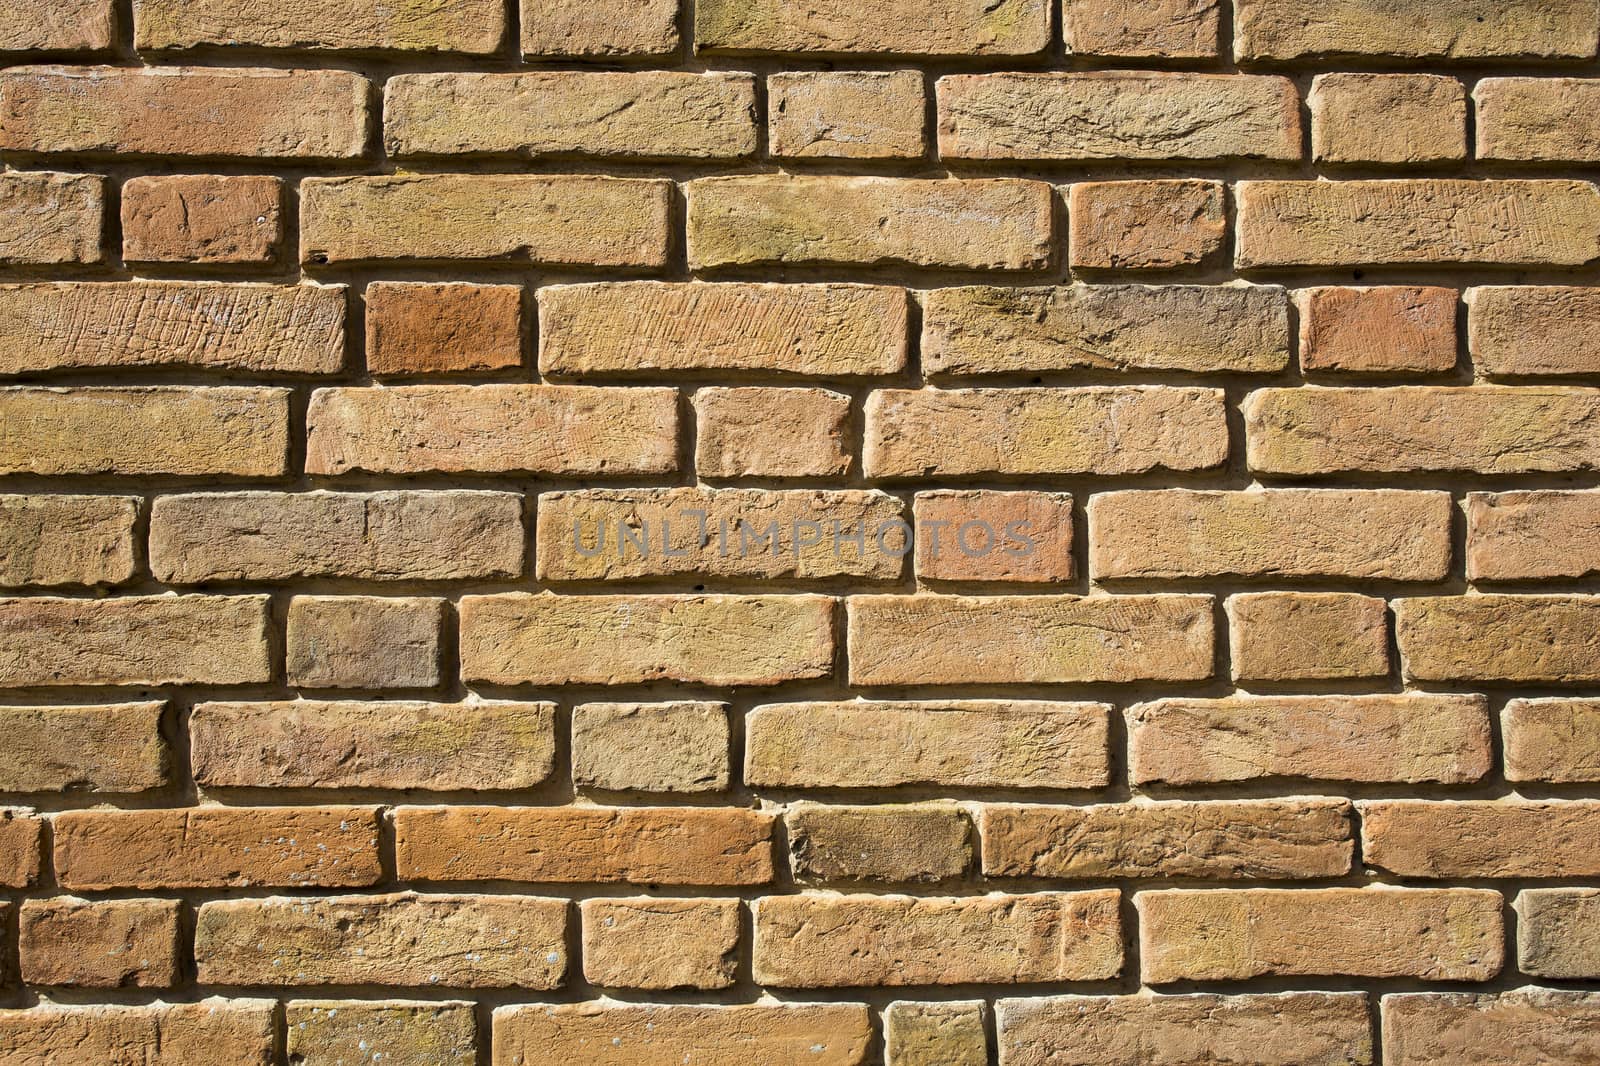 View of a detail of an ancient wall of bricks